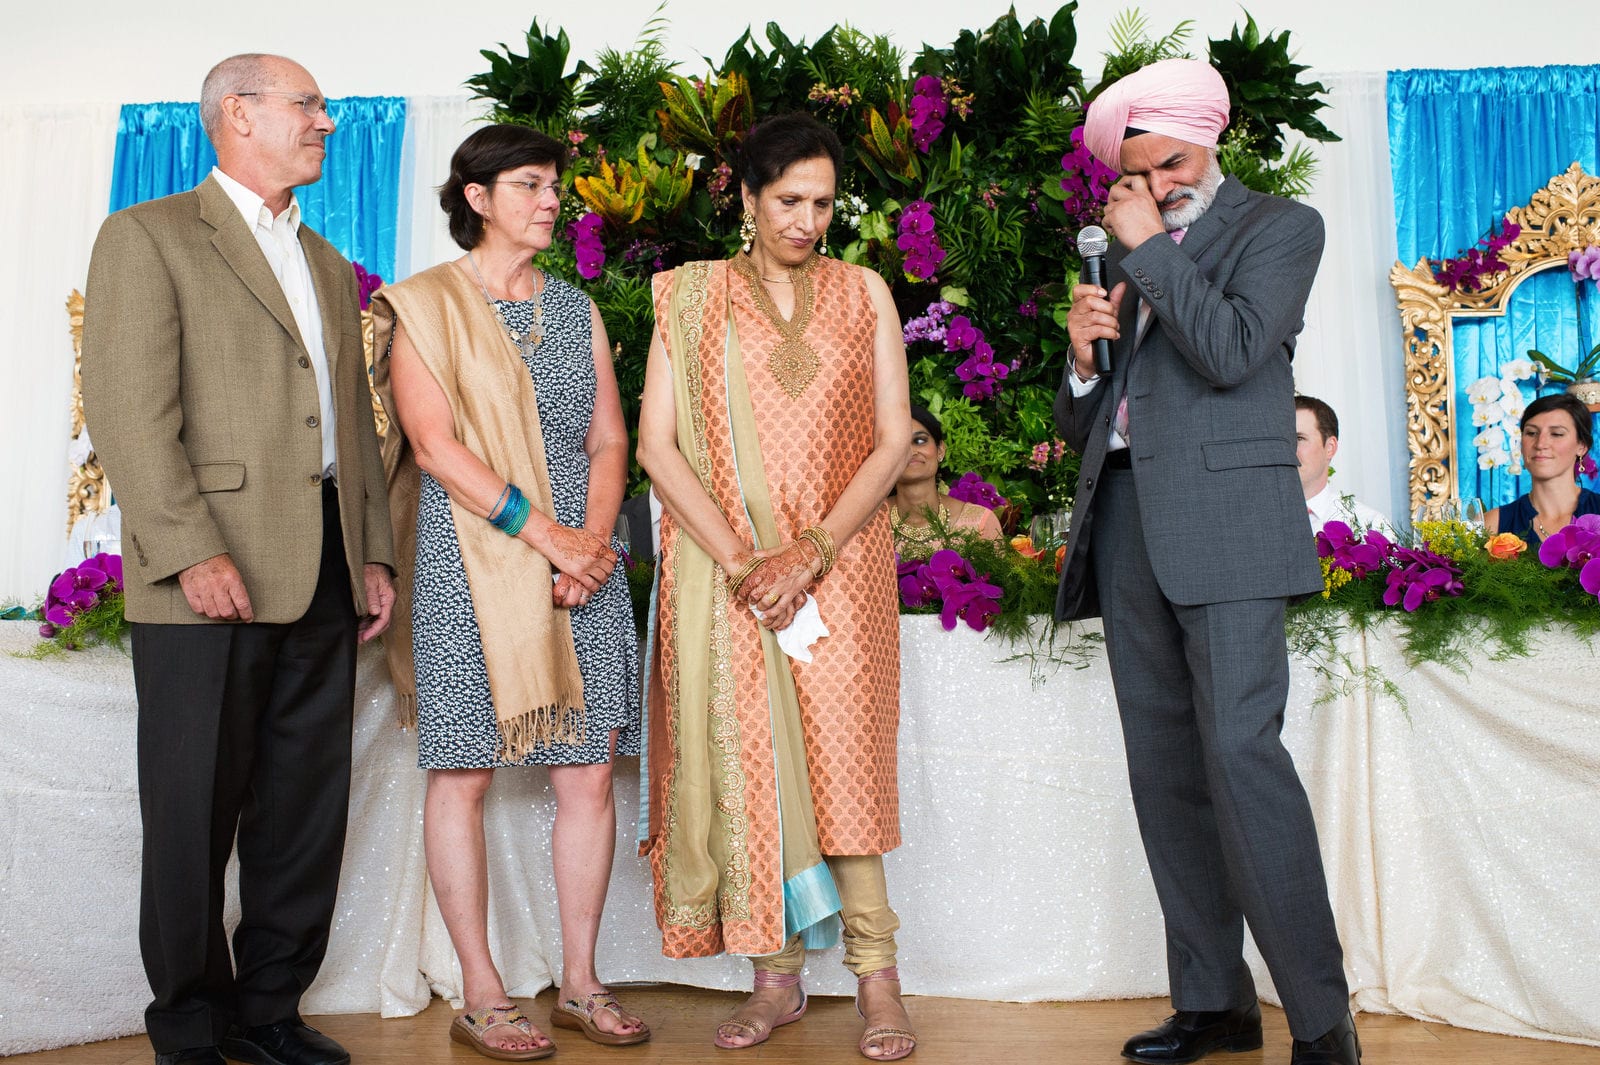 A turban-wearing father of the bride wipes a tear from his eye as he stands with his wife and the groom's parents while offering a toast to the bride and groom during their Renaissance Phipps South Asian Wedding.